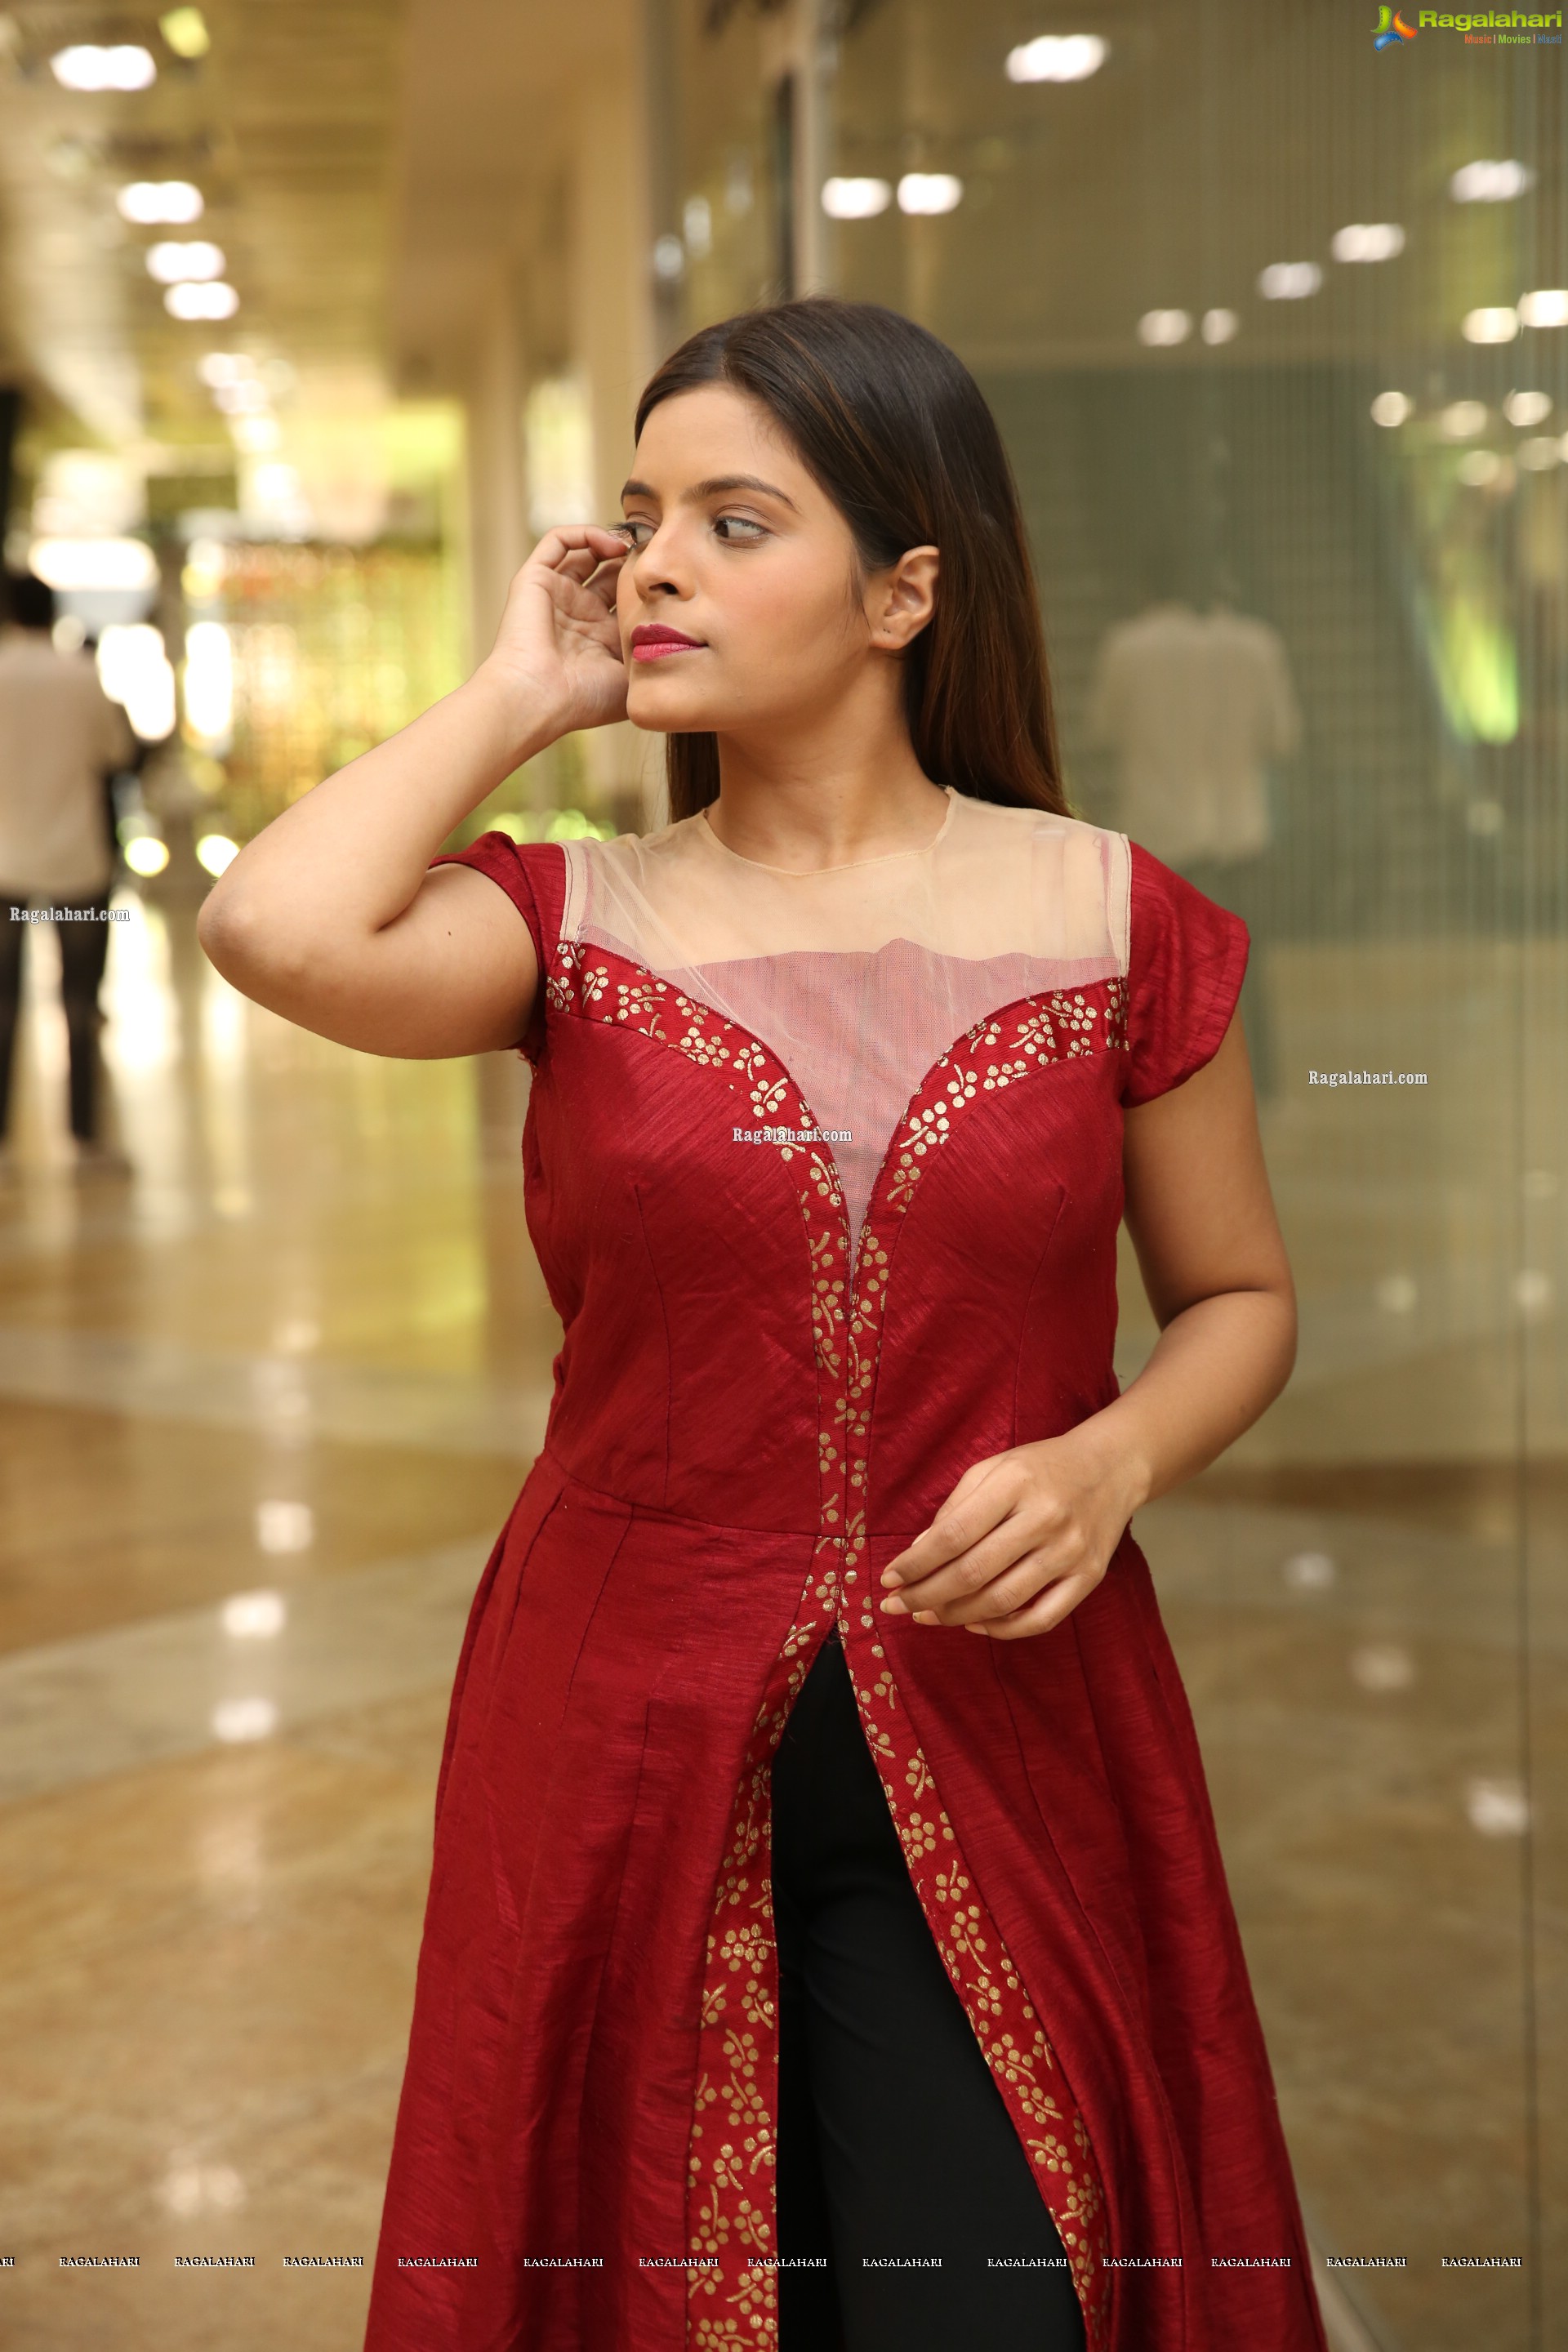 Kusumm in Red Fashionable Front Slit Kurti, HD Photo Gallery